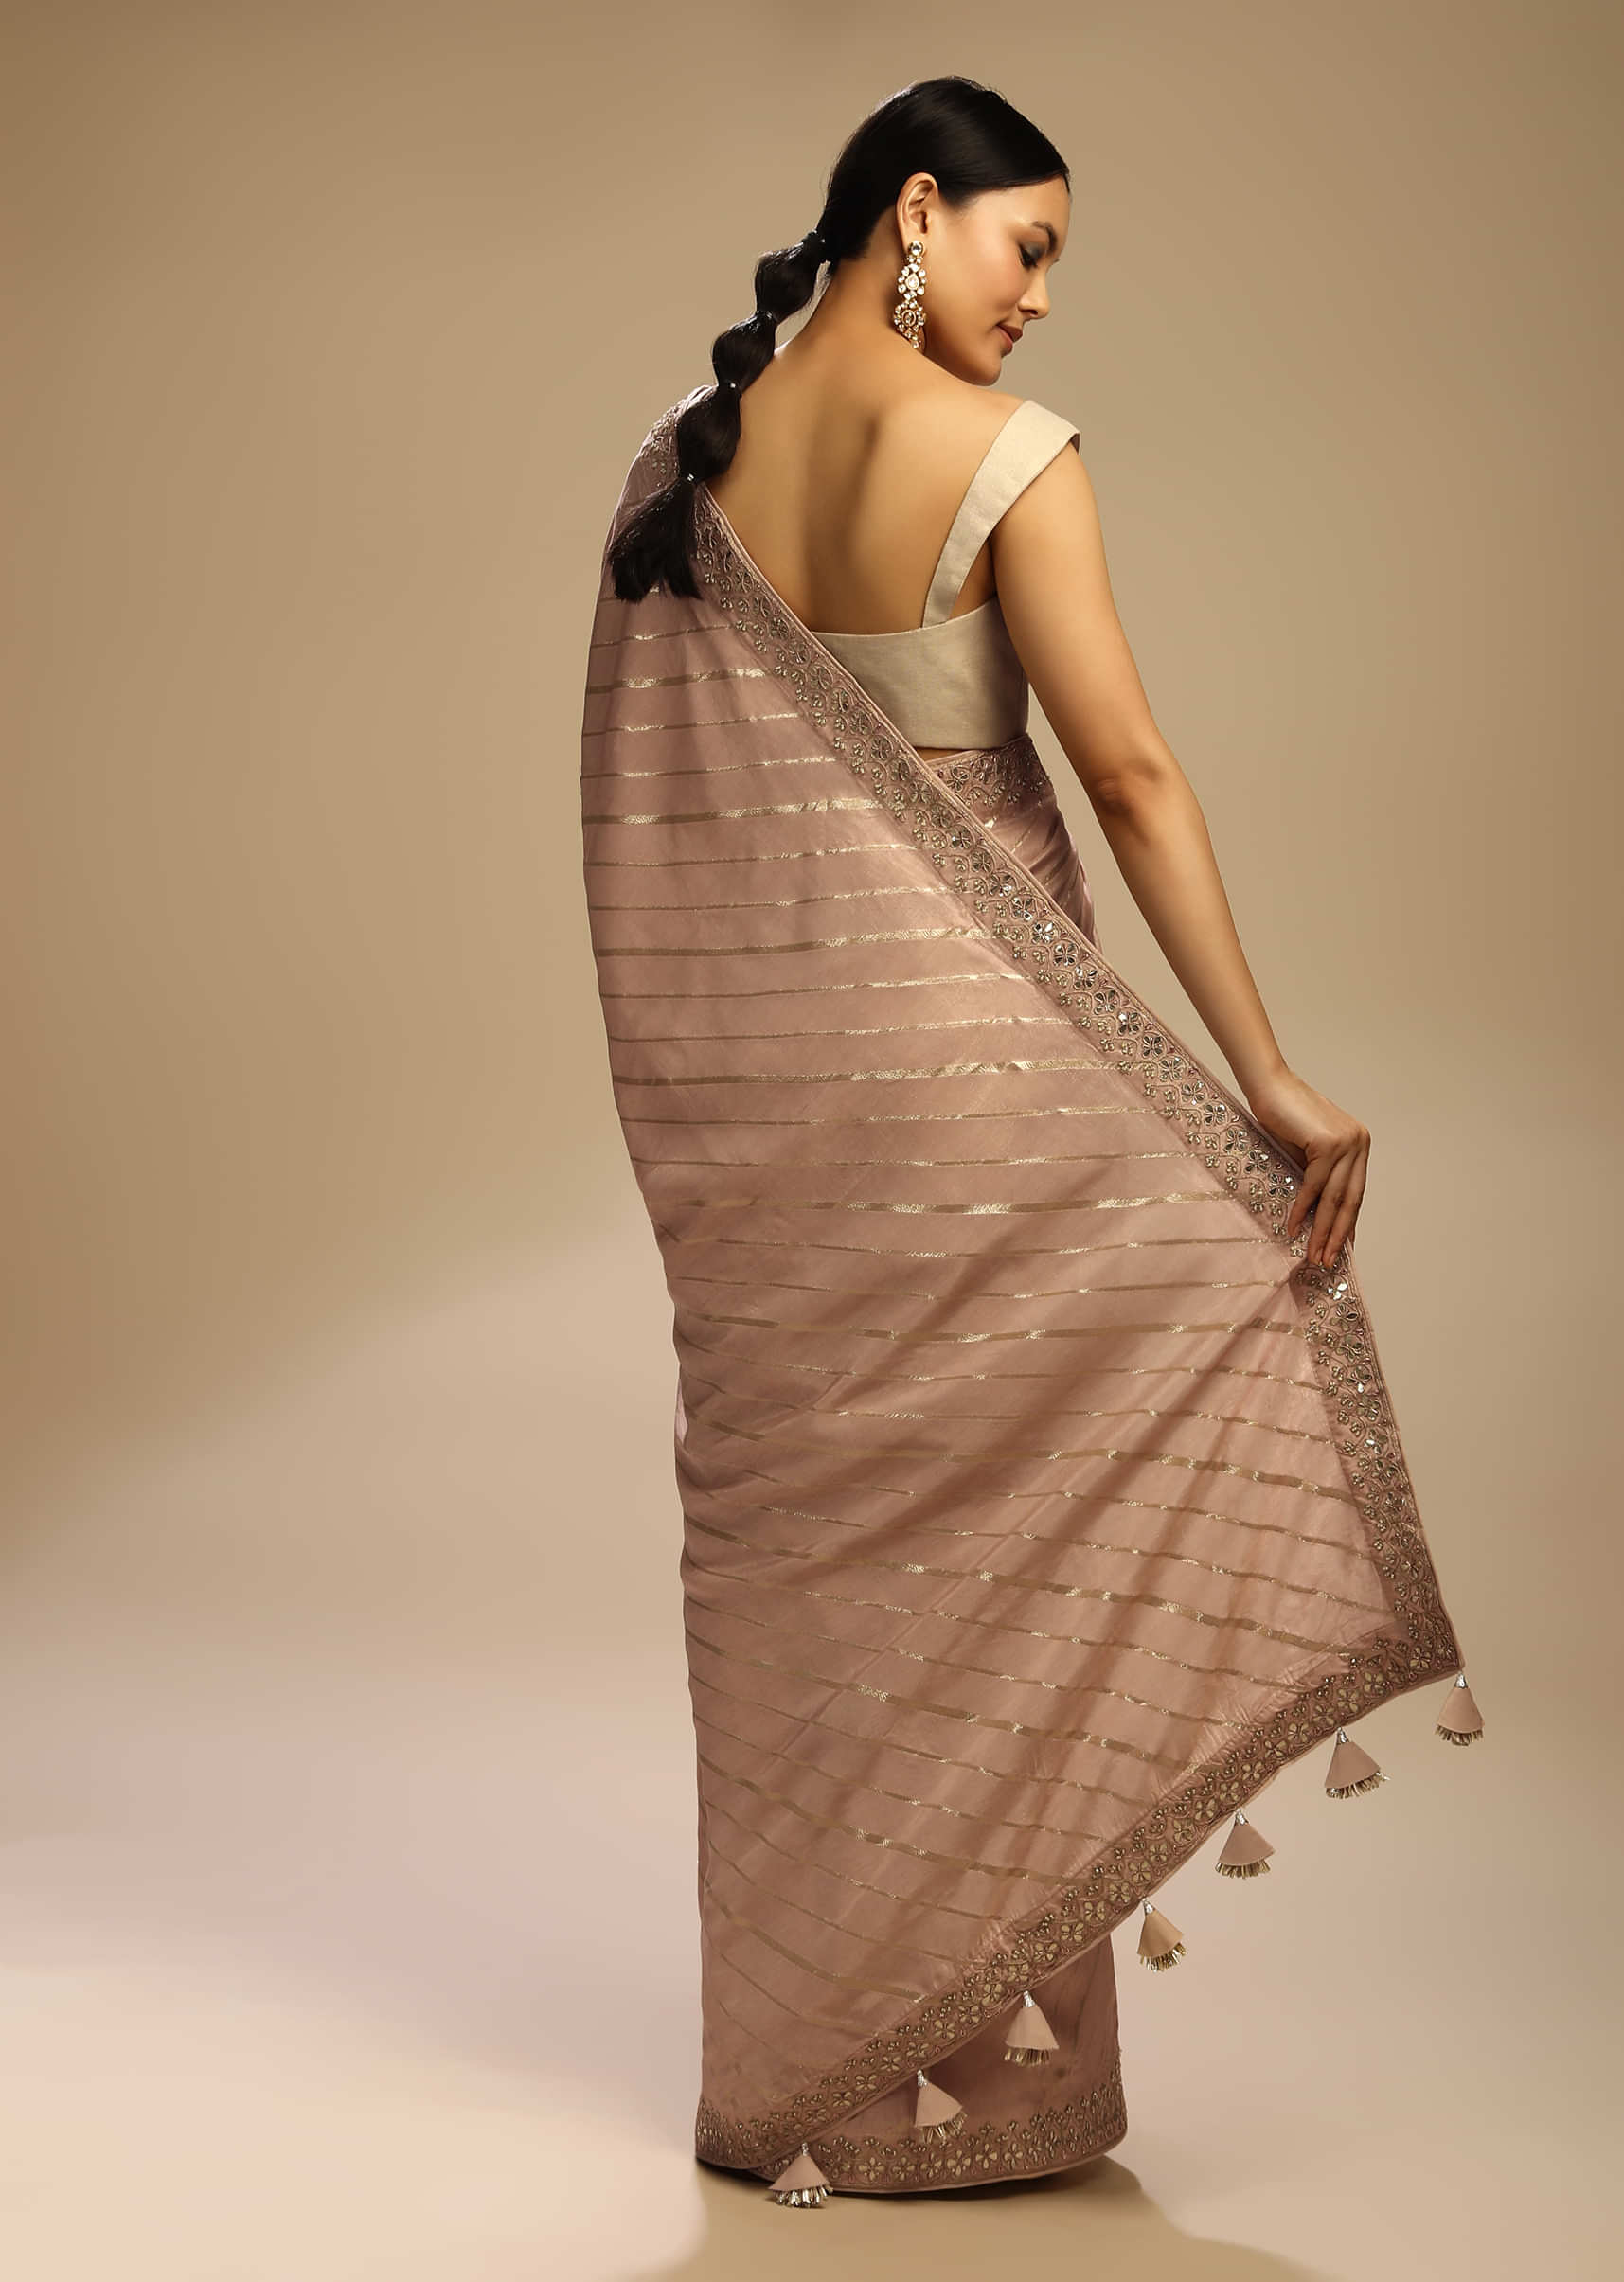 Peach Whip Saree In Dupion Silk With Woven Diagonal Stripes And Gotta Embroidered Floral Border